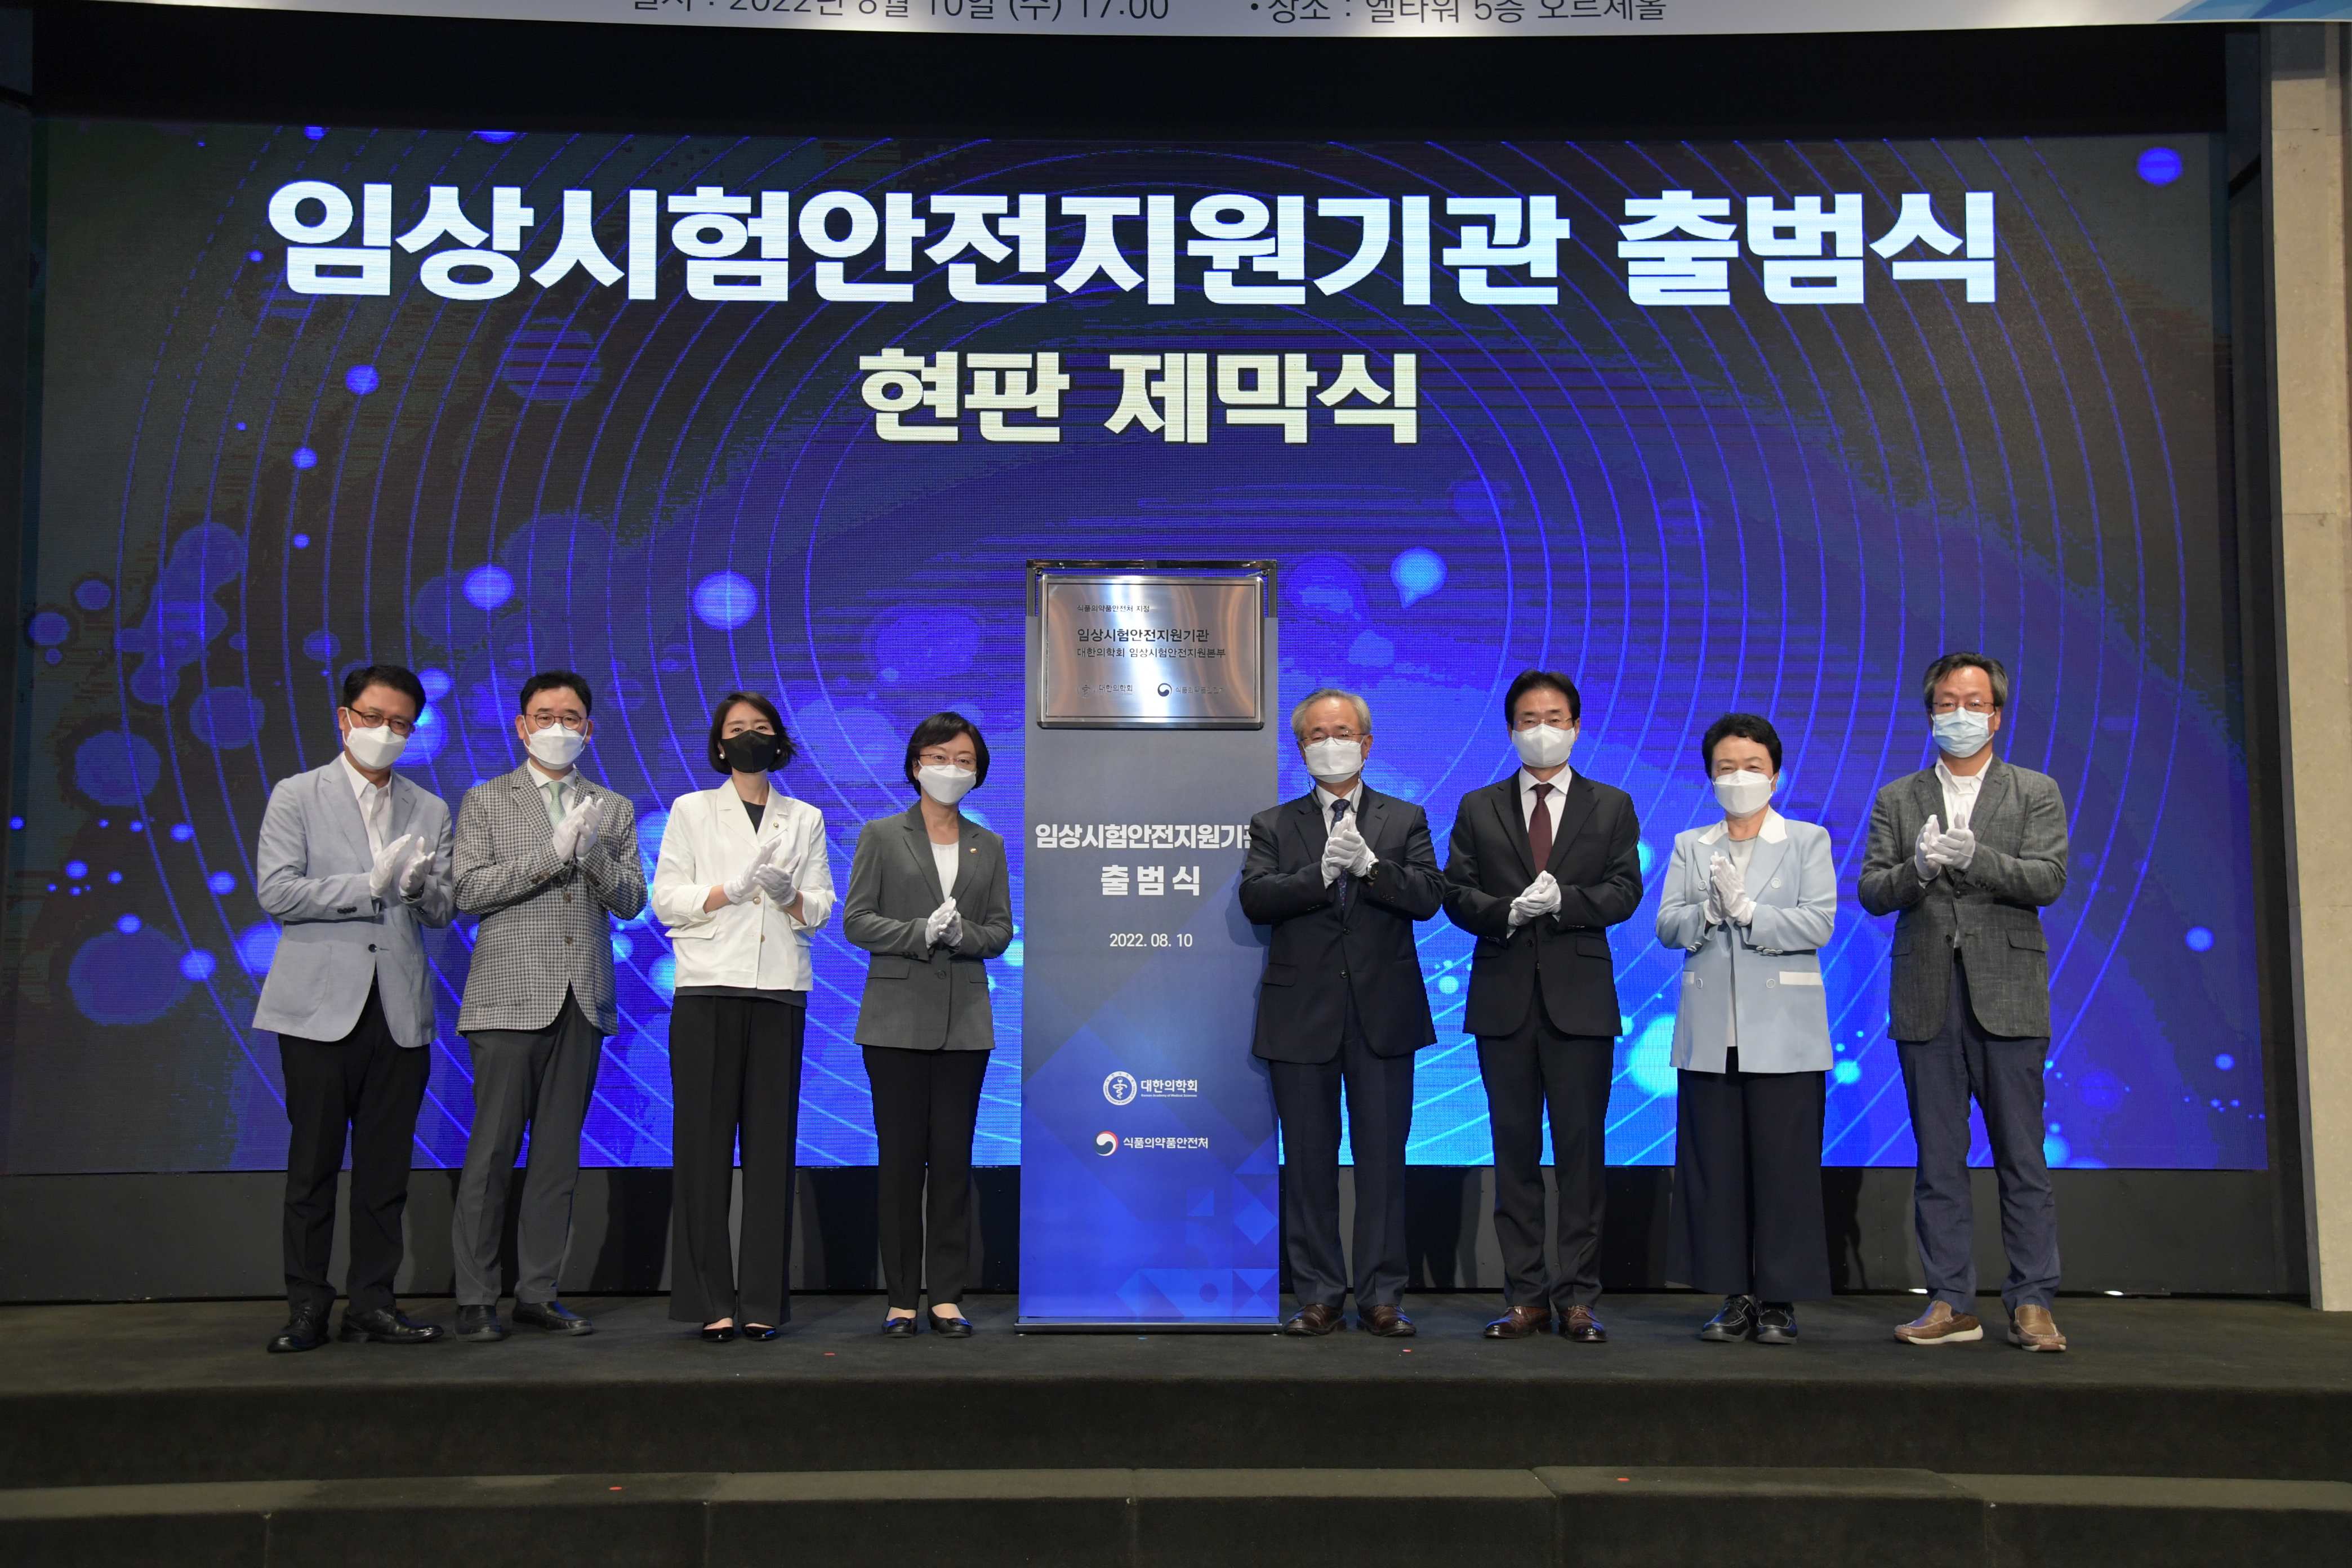 Photo News4 - [Aug. 10, 2022] Minister Attends the Launching Ceremony of the National Institute for Clinical Trial Safety